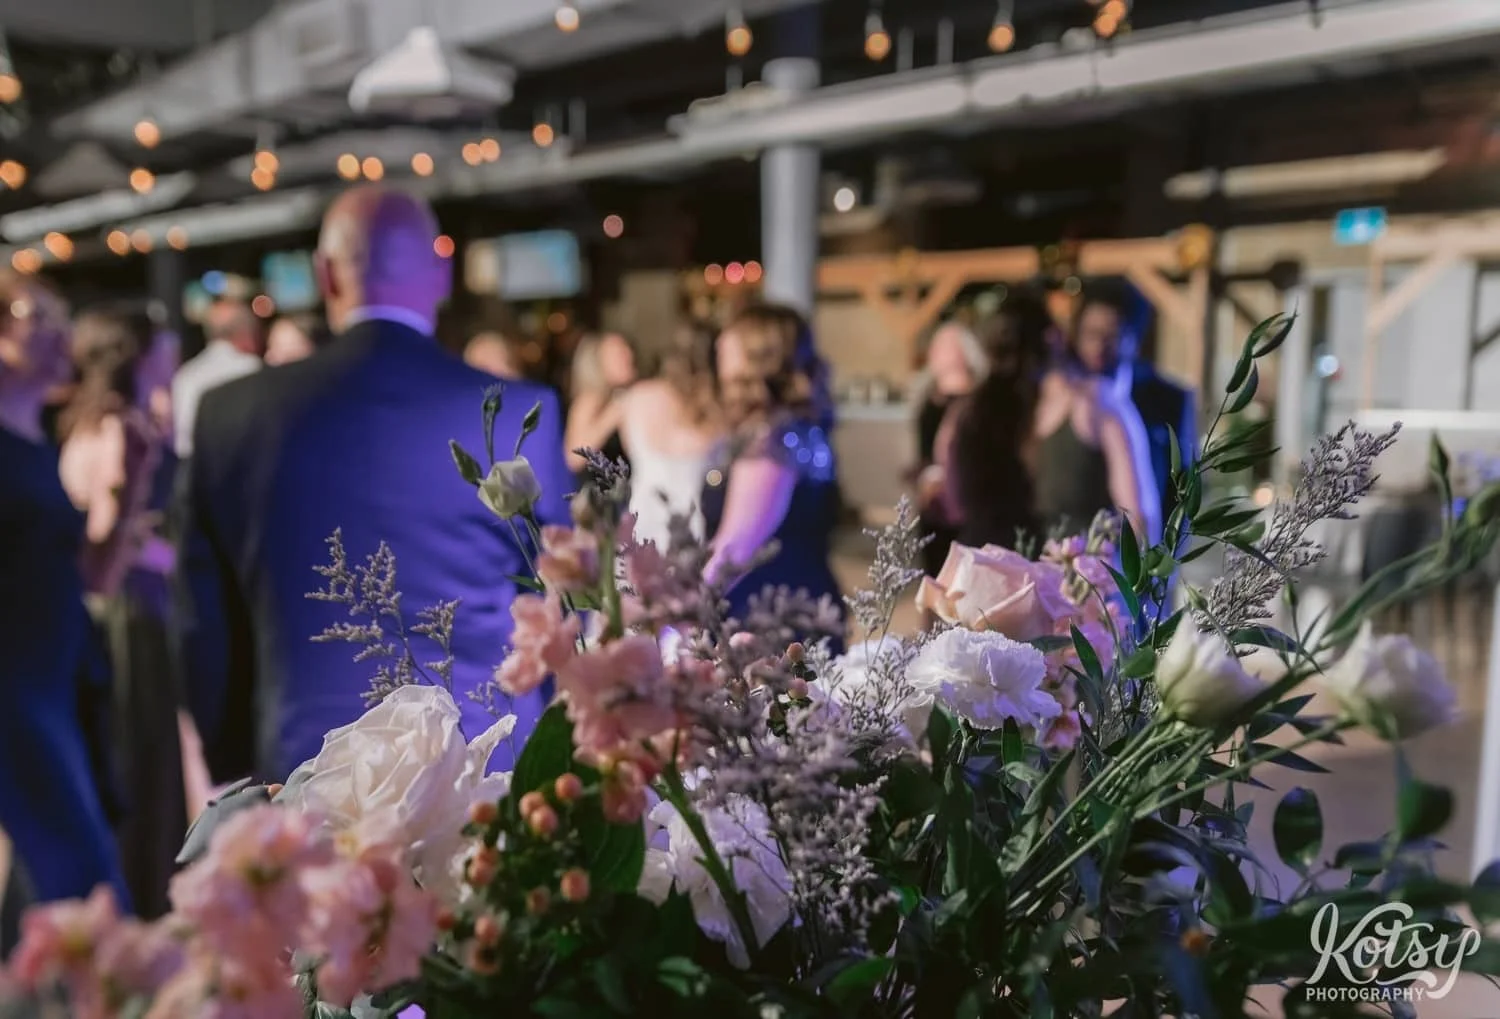 A close up shot of a bouquet of flowers with people dancing in the background out of focus during a Second Floor Events wedding reception in Toronto, Canada.